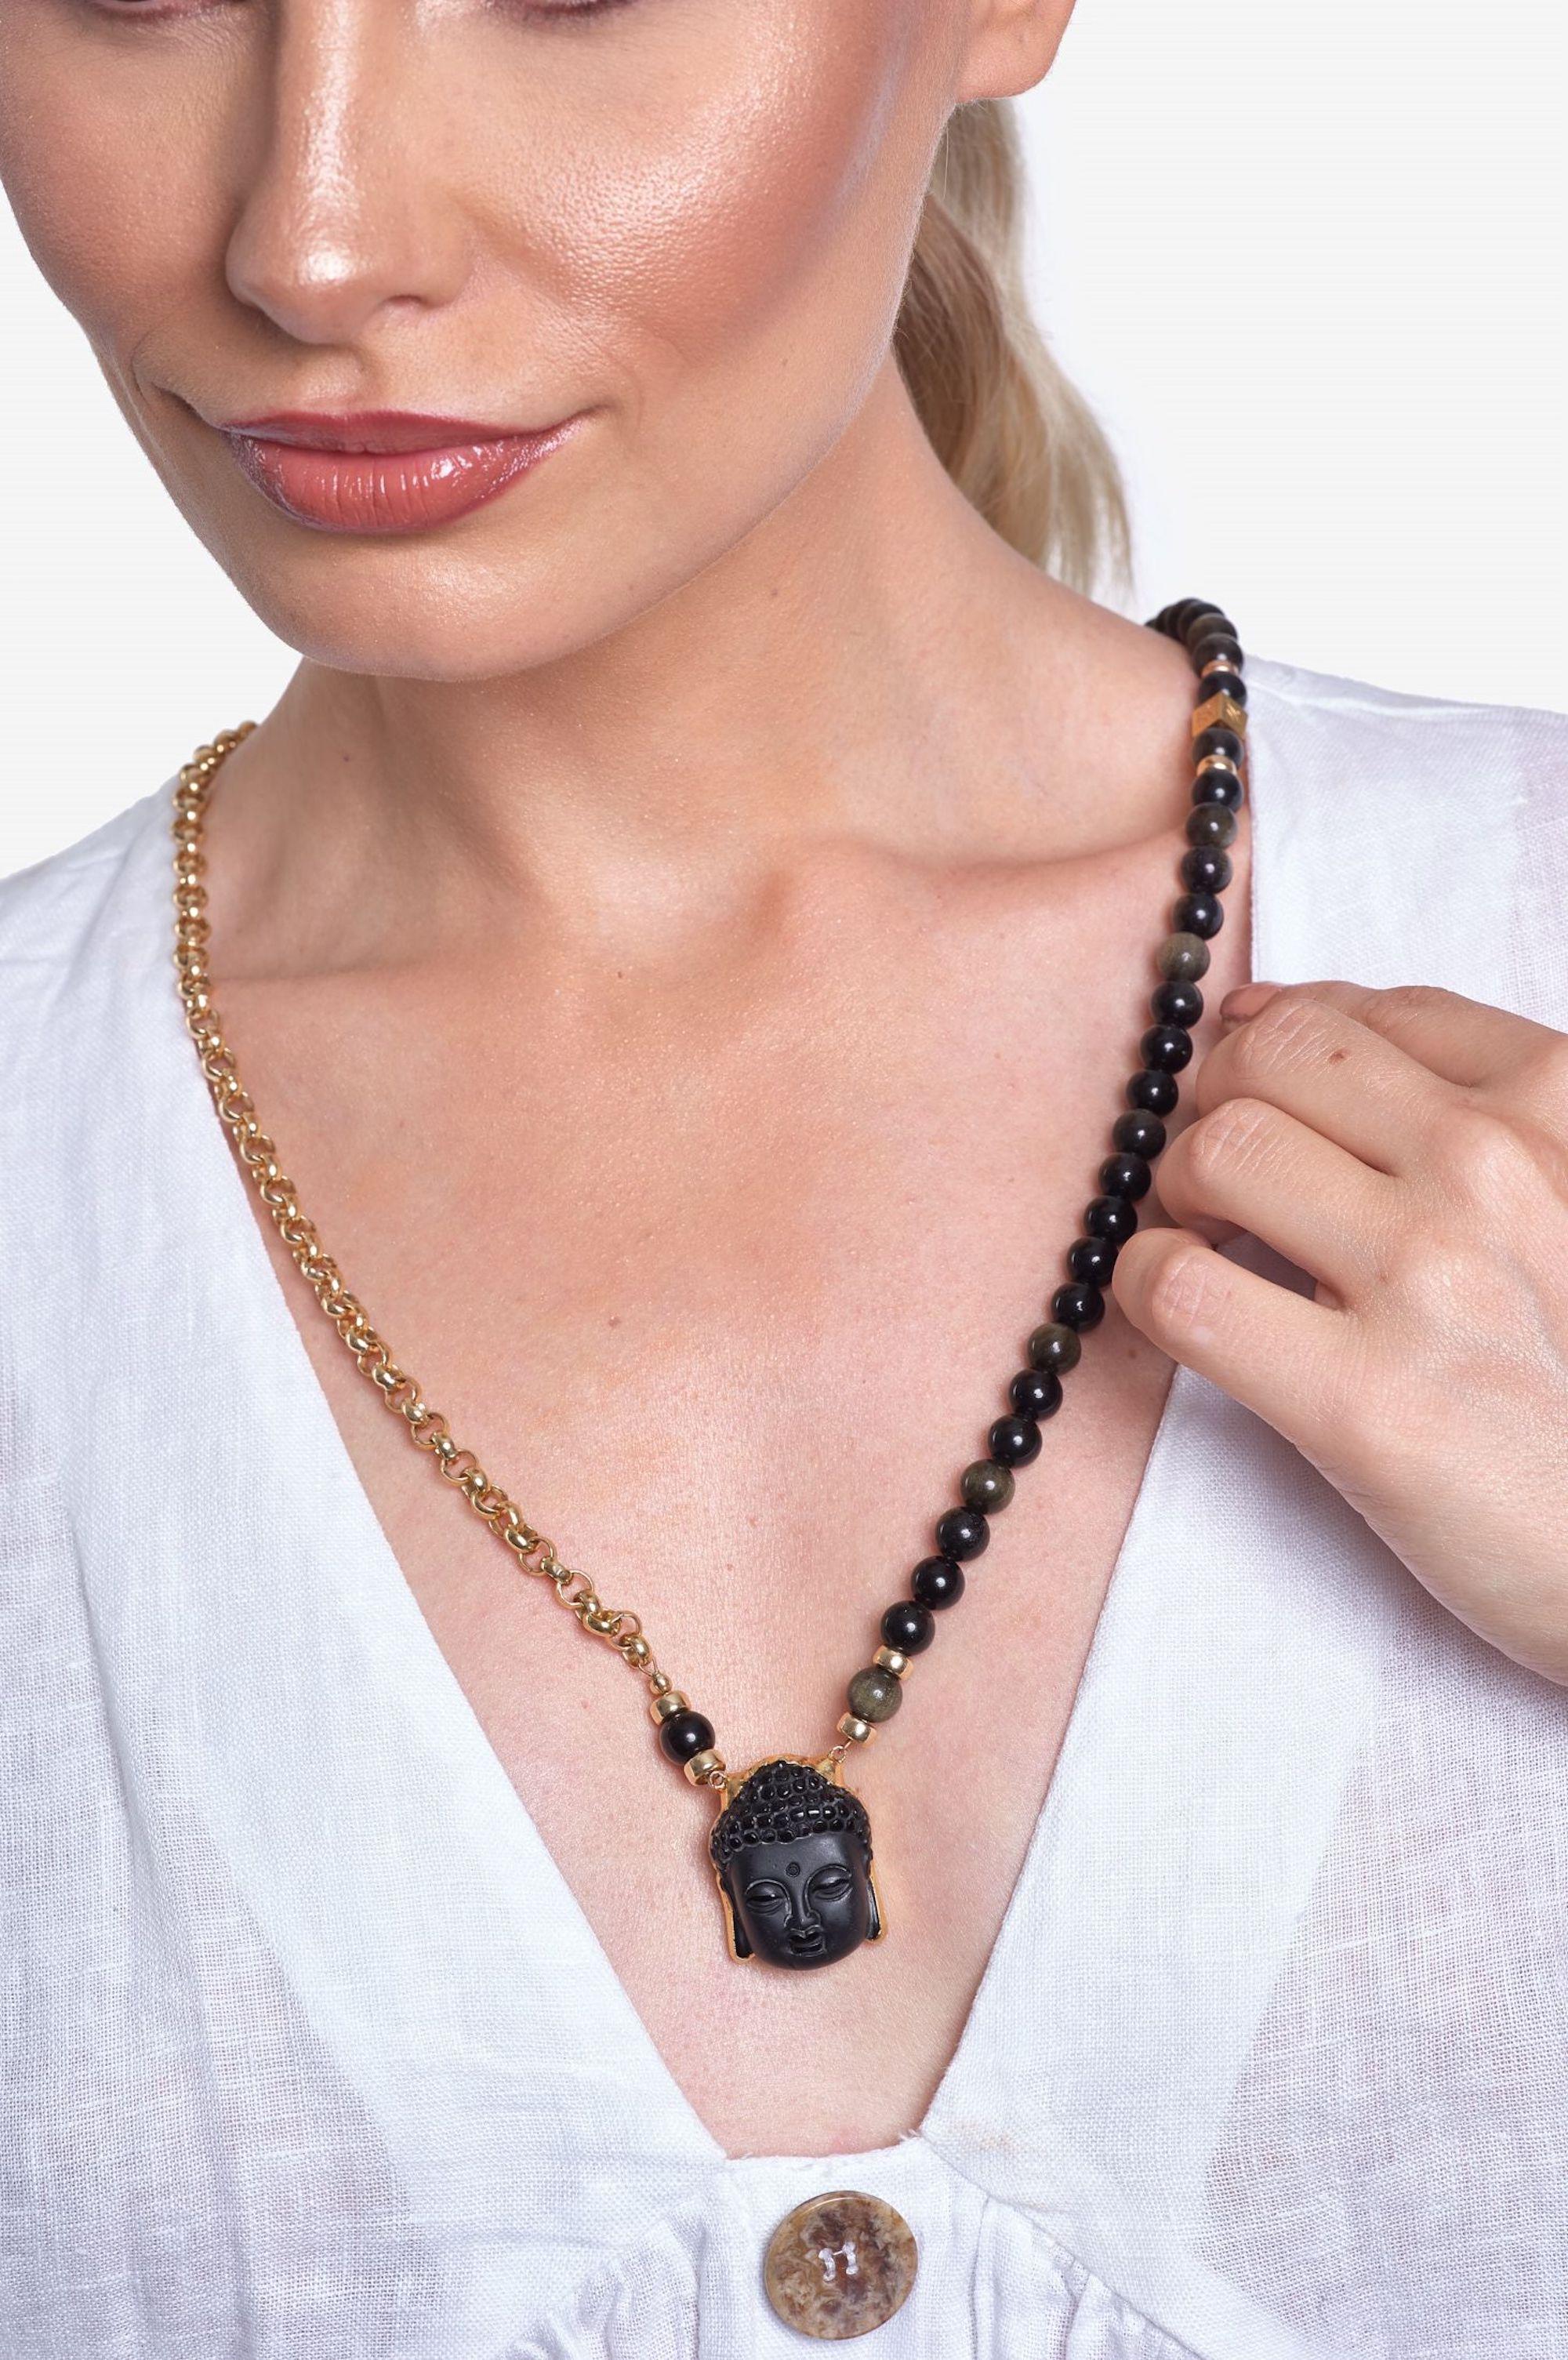 Change is one of the unique signature styles in the Jada Jo collection. It provides duality by using a chain for half of the necklace while the other half is adorned with 14K gold and golden obsidian. Obsidian helps clears the dark to move towards